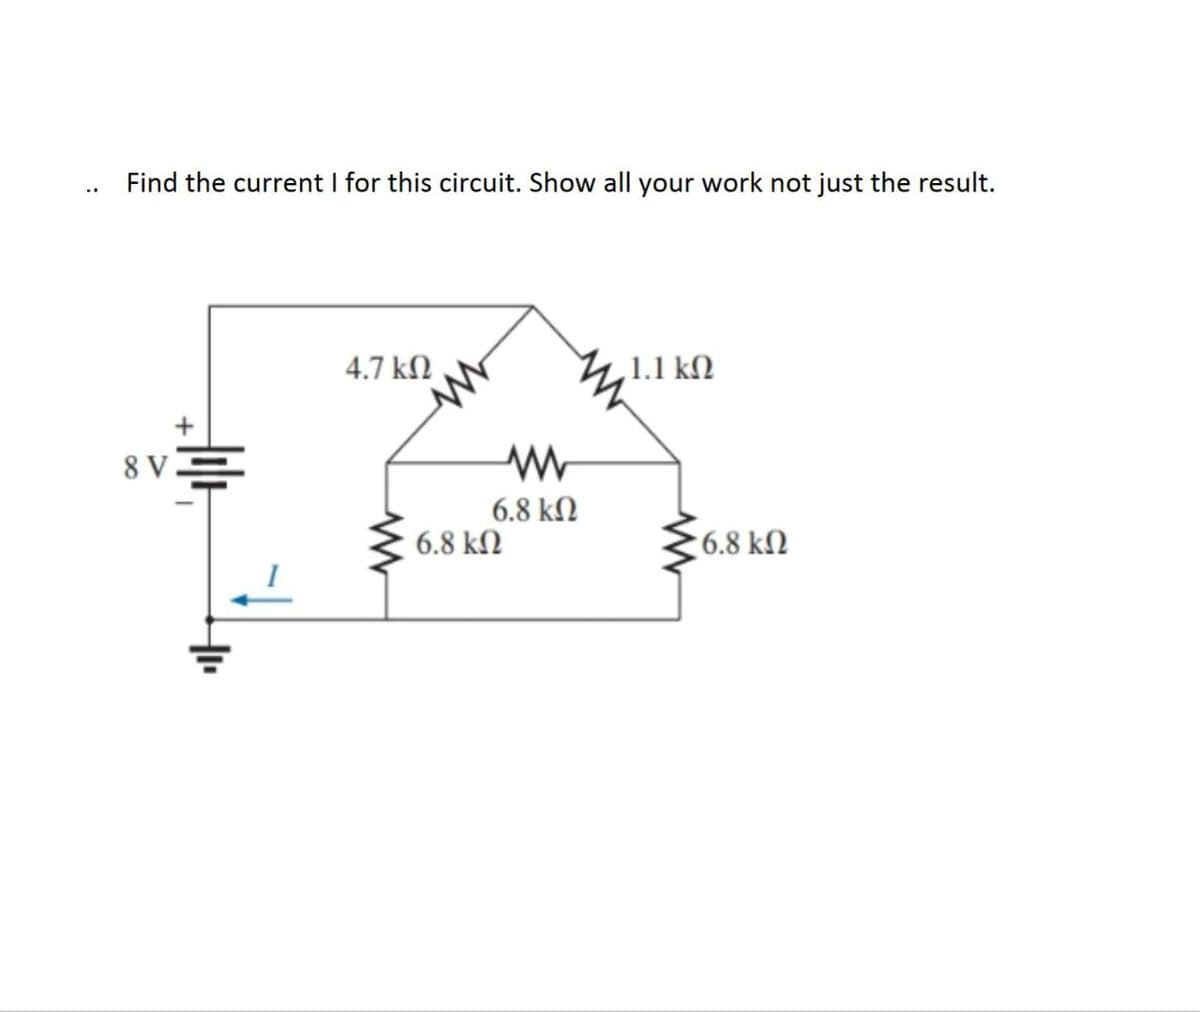 Find the current I for this circuit. Show all your work not just the result.
+
8 V
4.7 ΚΩ
6.8 ΚΩ
w
6.8 ΚΩ
1.1 ΚΩ
1 6.8 ΚΩ